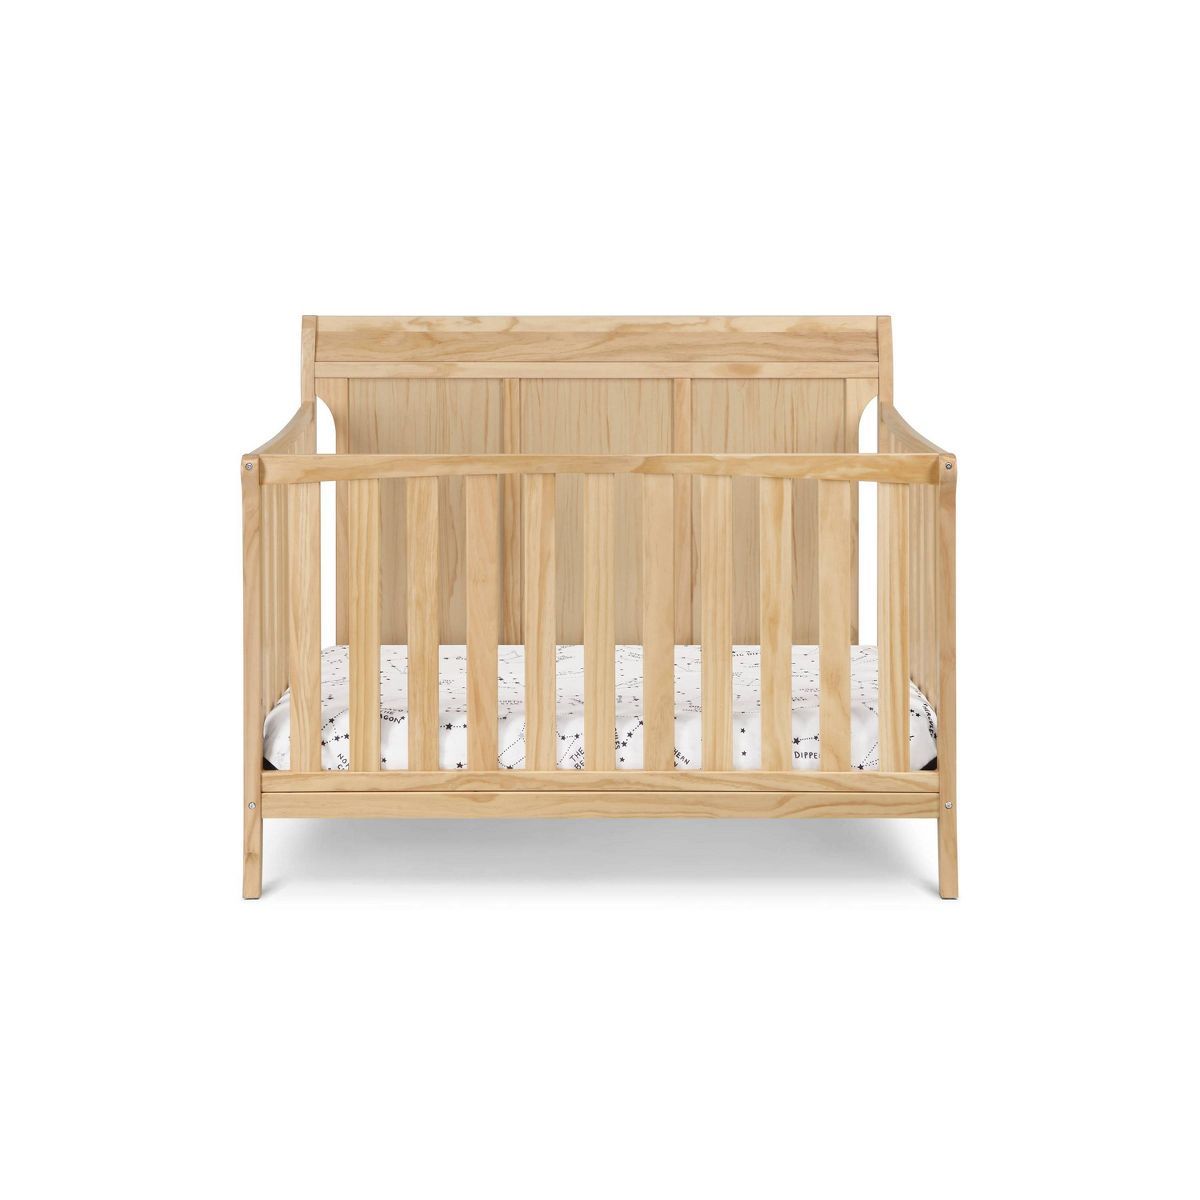 Suite Bebe Shailee 4-in-1 Convertible Crib - Natural | Target